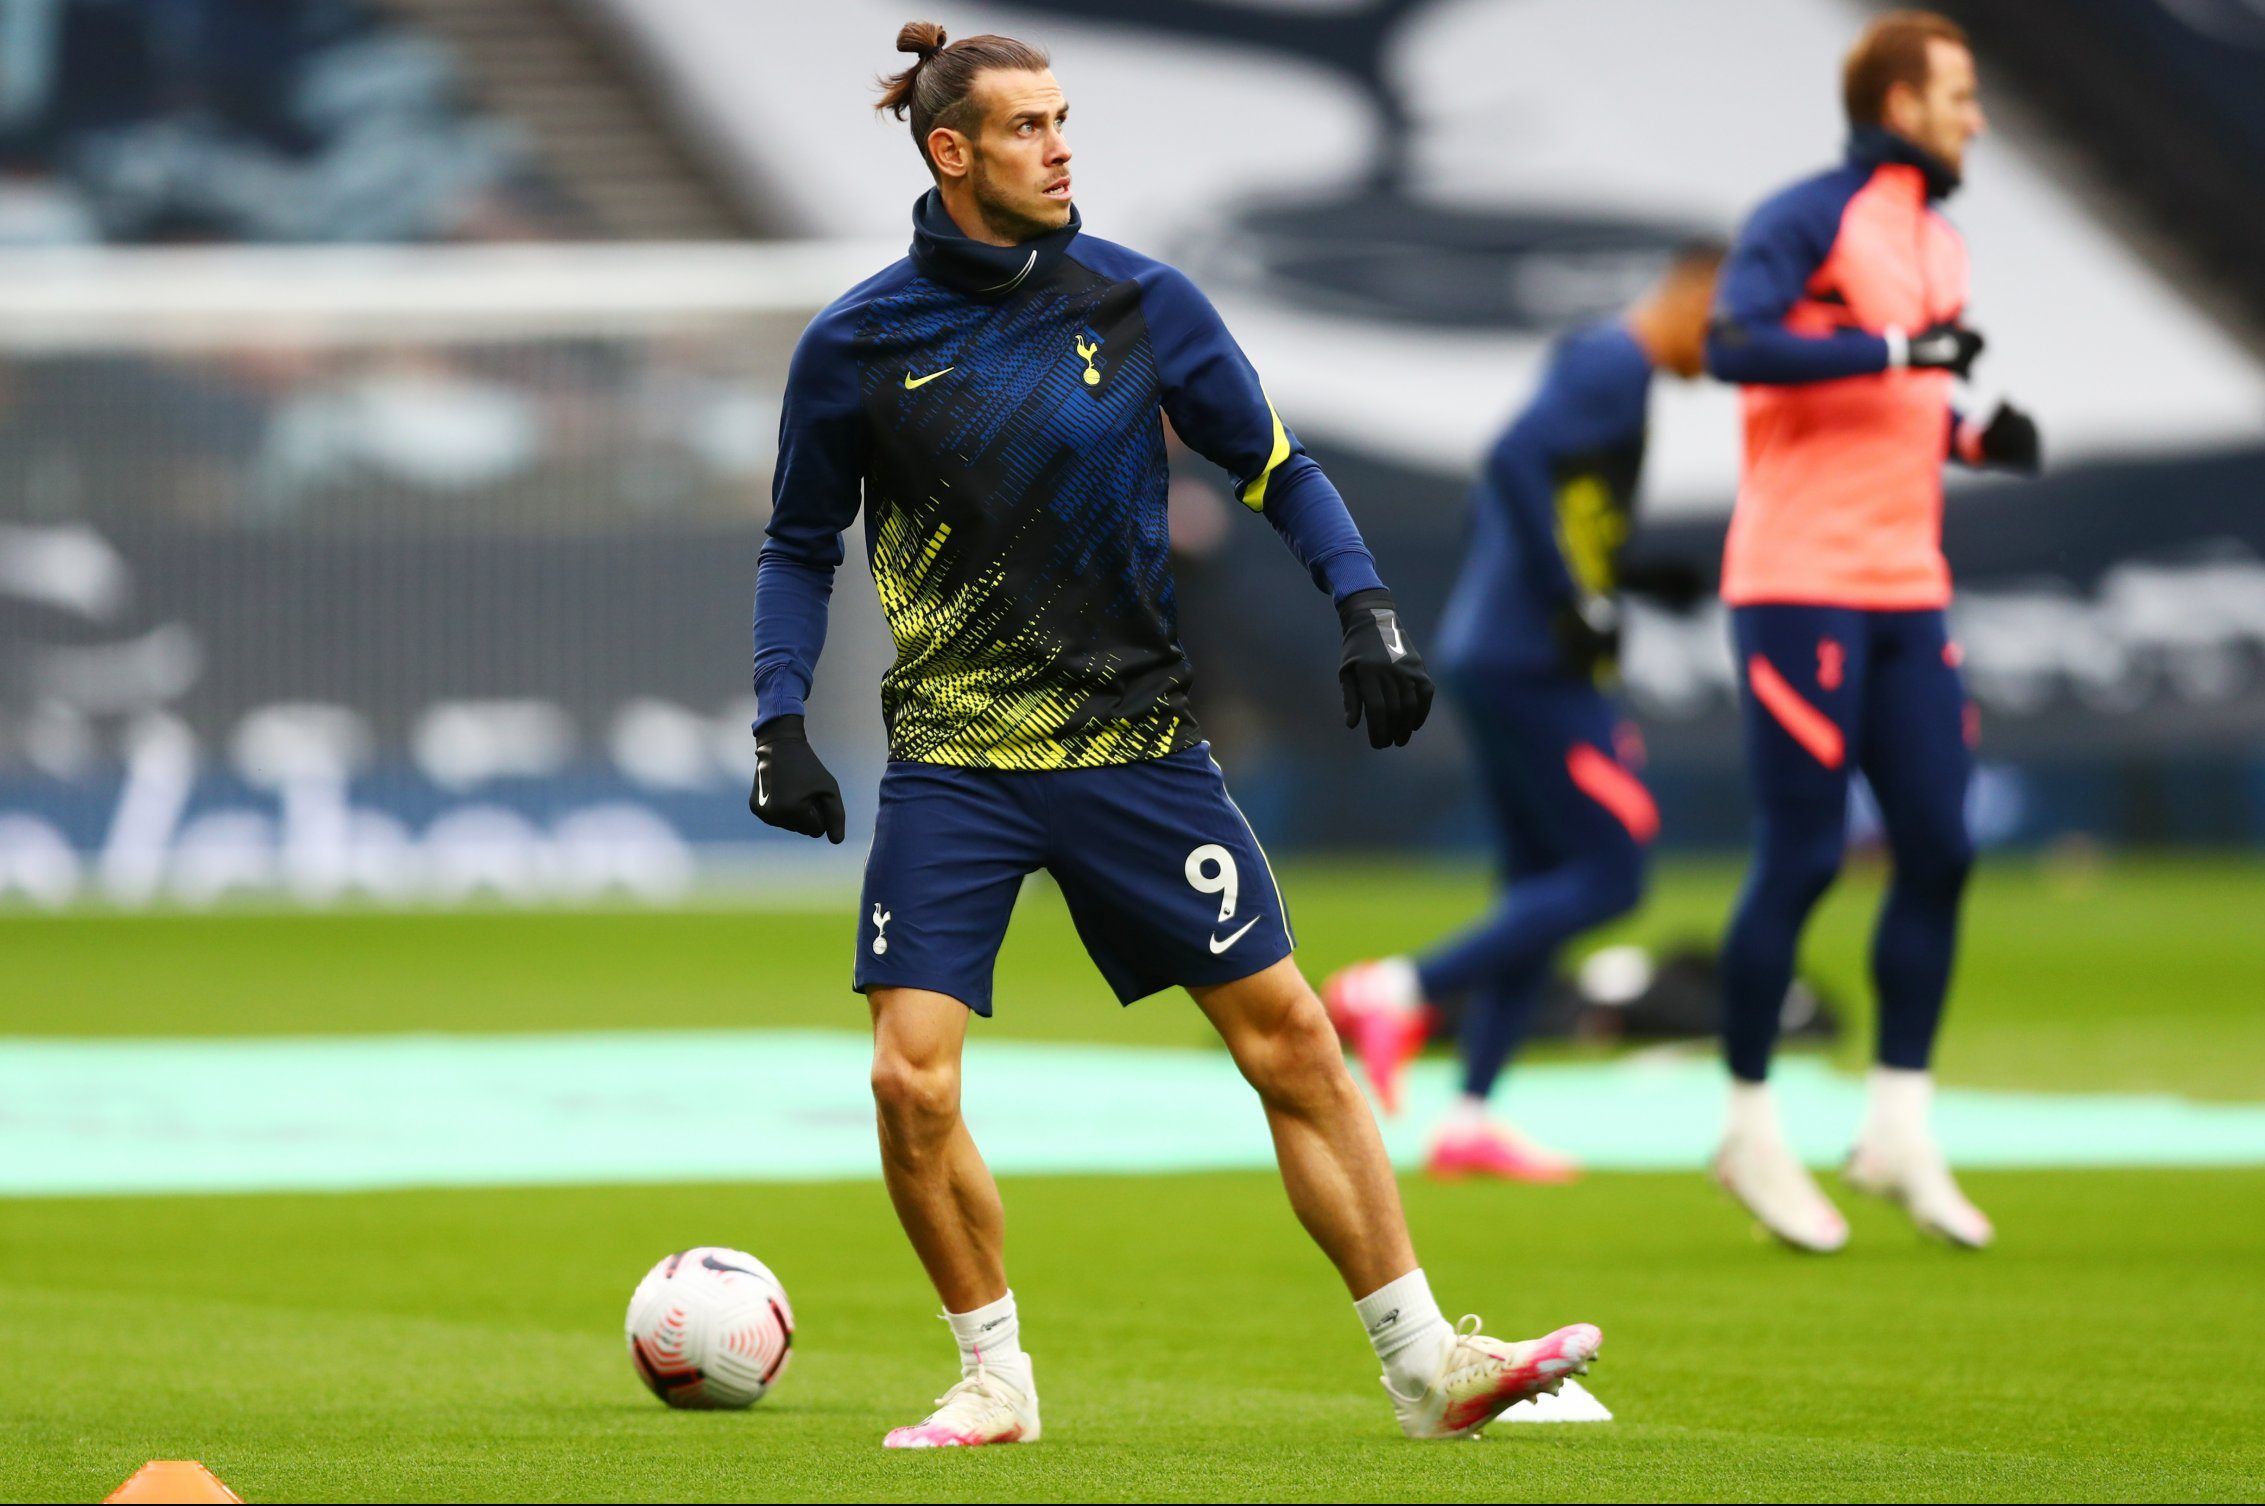 Gareth Bale warms up for Spurs